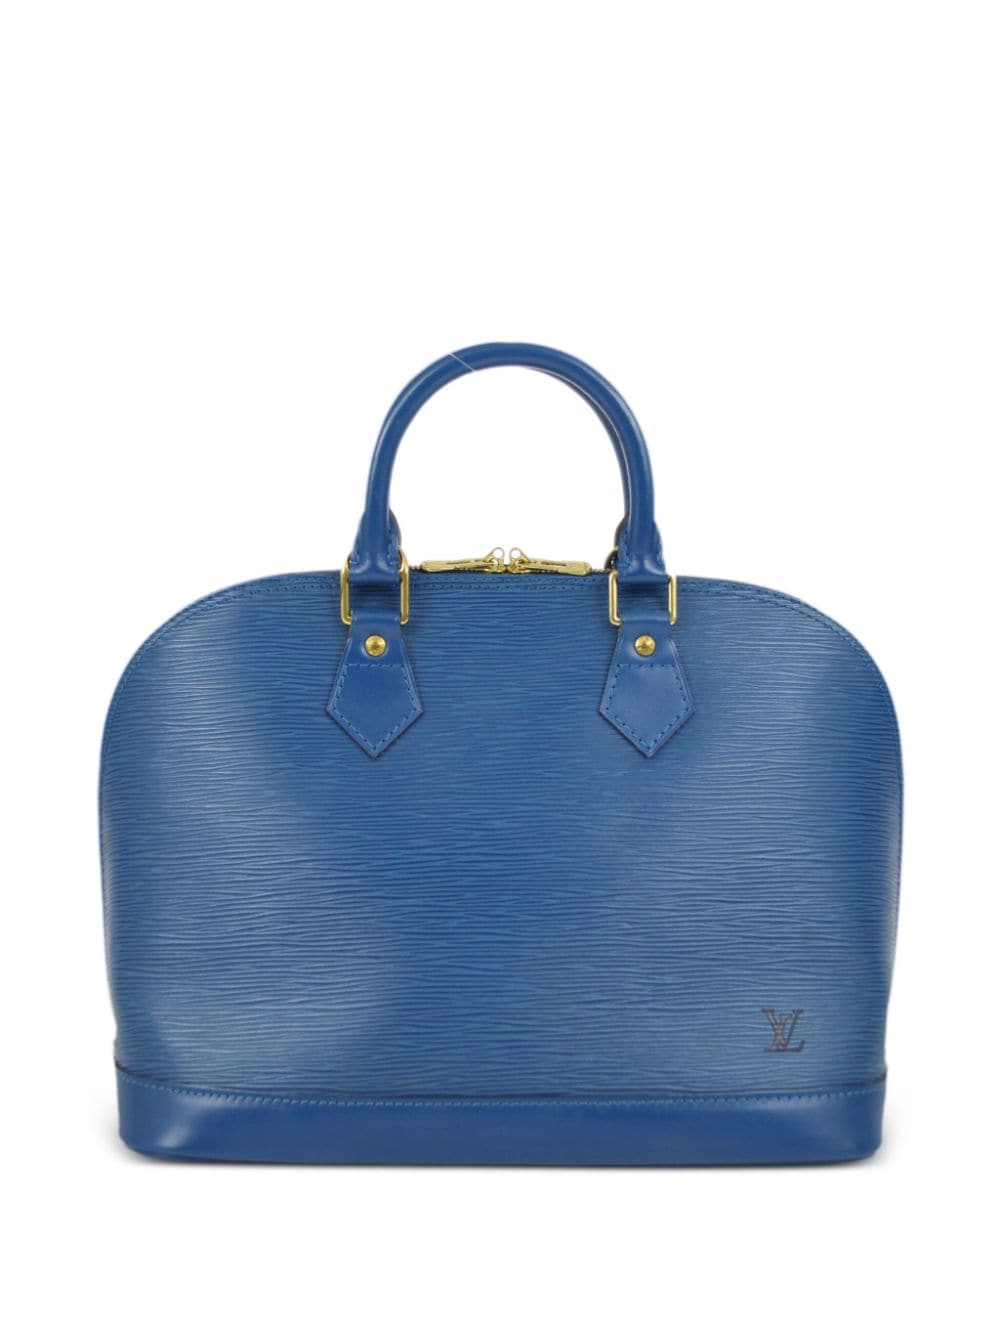 Pre-owned Louis Vuitton 1997  Alma Pm Tote Bag In Blue